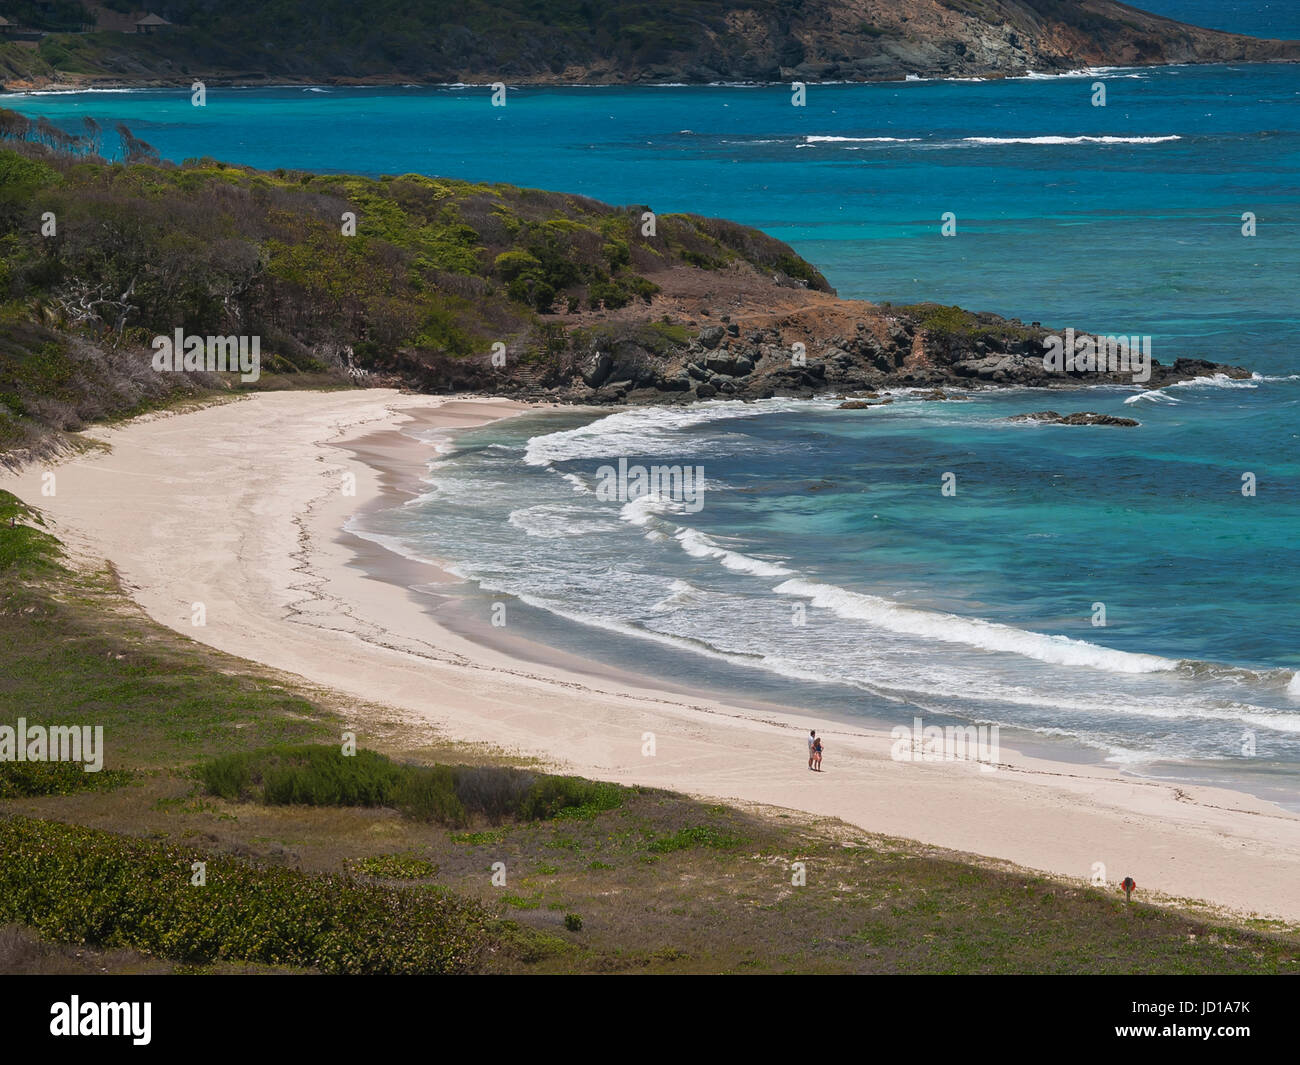 The empty white beach at Pasture Bay, Mustique Island, Grendadine Islands with its azure blue sea. romantic honeymoon couple alone on the beach. Stock Photo